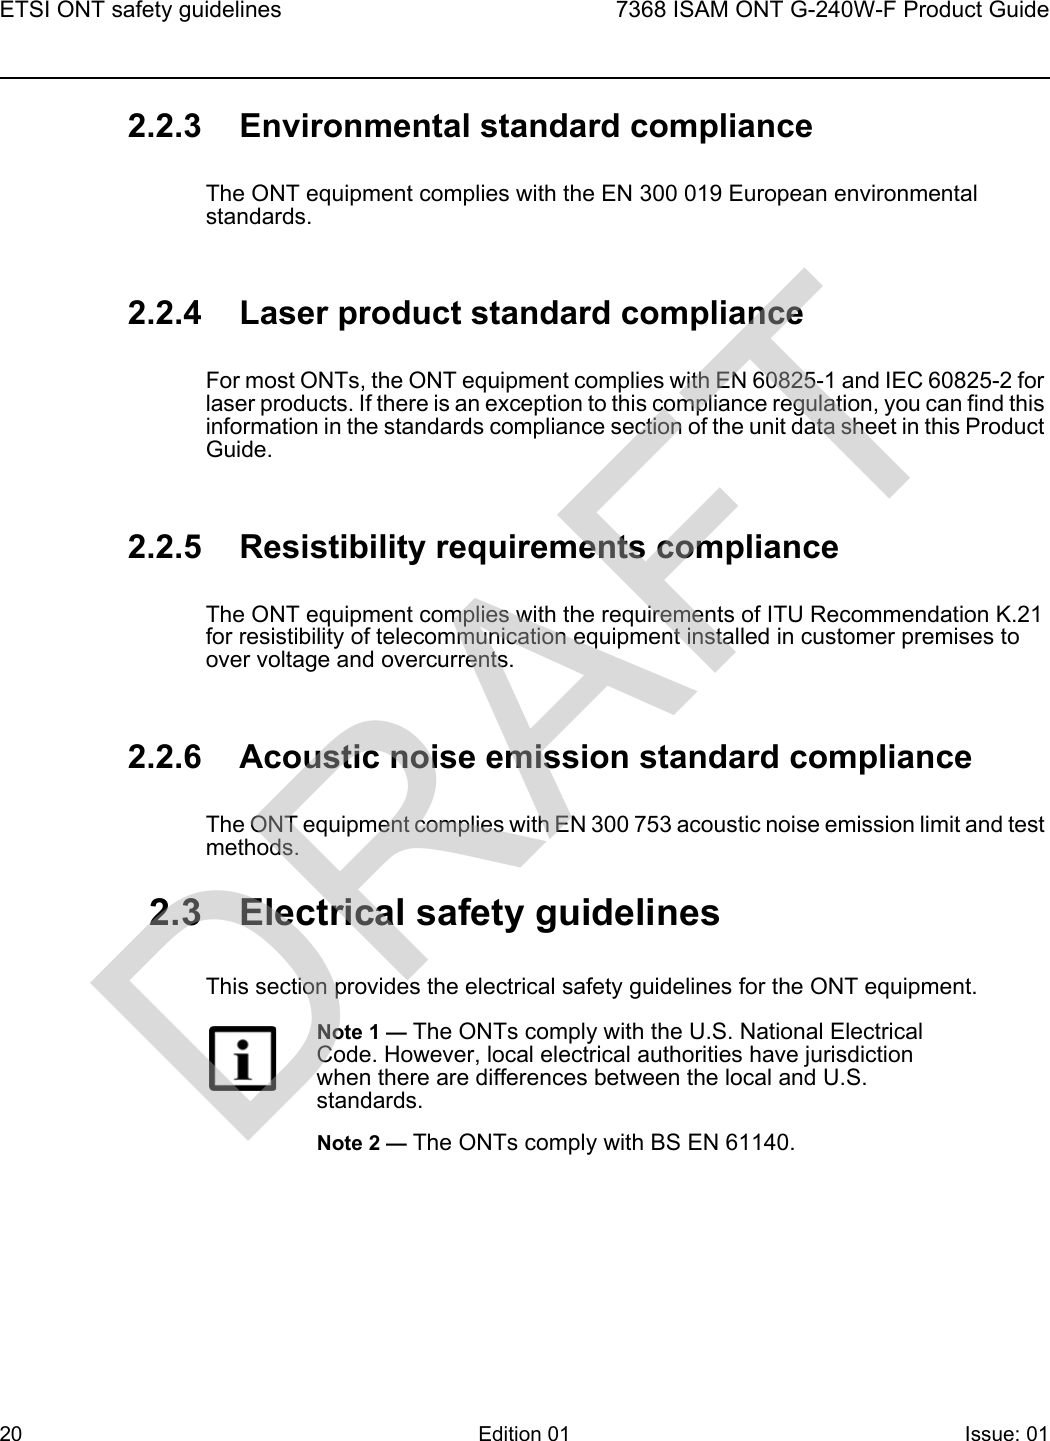 ETSI ONT safety guidelines207368 ISAM ONT G-240W-F Product GuideEdition 01 Issue: 01 2.2.3 Environmental standard complianceThe ONT equipment complies with the EN 300 019 European environmental standards.2.2.4 Laser product standard complianceFor most ONTs, the ONT equipment complies with EN 60825-1 and IEC 60825-2 for laser products. If there is an exception to this compliance regulation, you can find this information in the standards compliance section of the unit data sheet in this Product Guide.2.2.5 Resistibility requirements complianceThe ONT equipment complies with the requirements of ITU Recommendation K.21 for resistibility of telecommunication equipment installed in customer premises to over voltage and overcurrents.2.2.6 Acoustic noise emission standard complianceThe ONT equipment complies with EN 300 753 acoustic noise emission limit and test methods. 2.3 Electrical safety guidelinesThis section provides the electrical safety guidelines for the ONT equipment.Note 1 — The ONTs comply with the U.S. National Electrical Code. However, local electrical authorities have jurisdiction when there are differences between the local and U.S. standards.Note 2 — The ONTs comply with BS EN 61140.DRAFT